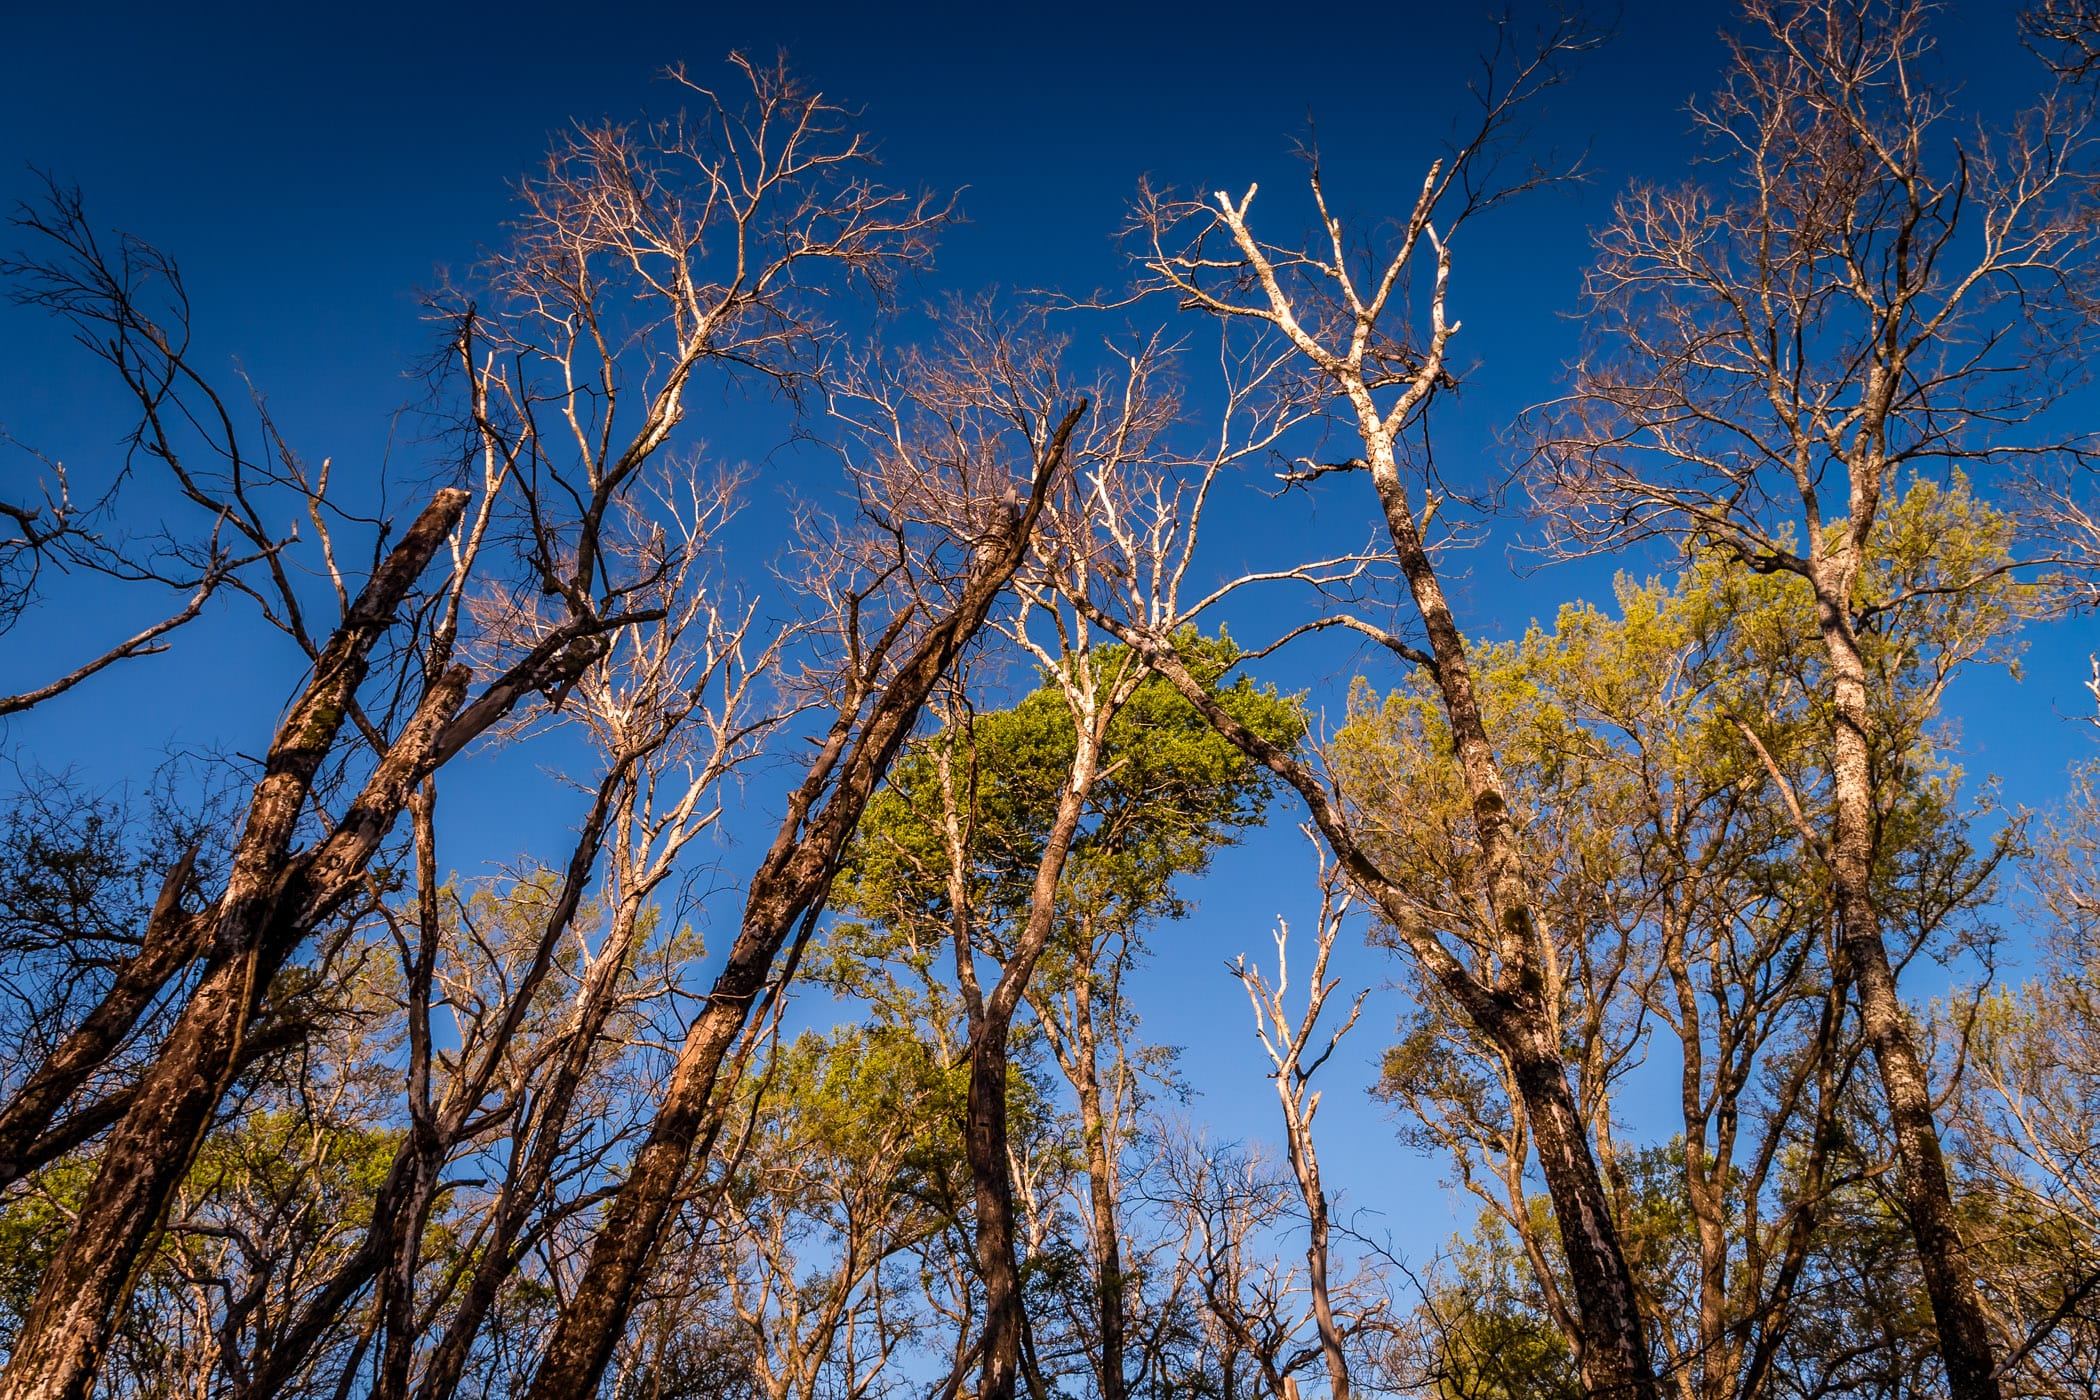 Trees in Dallas' Great Trinity Forest reach into the clear blue sky over North Texas.